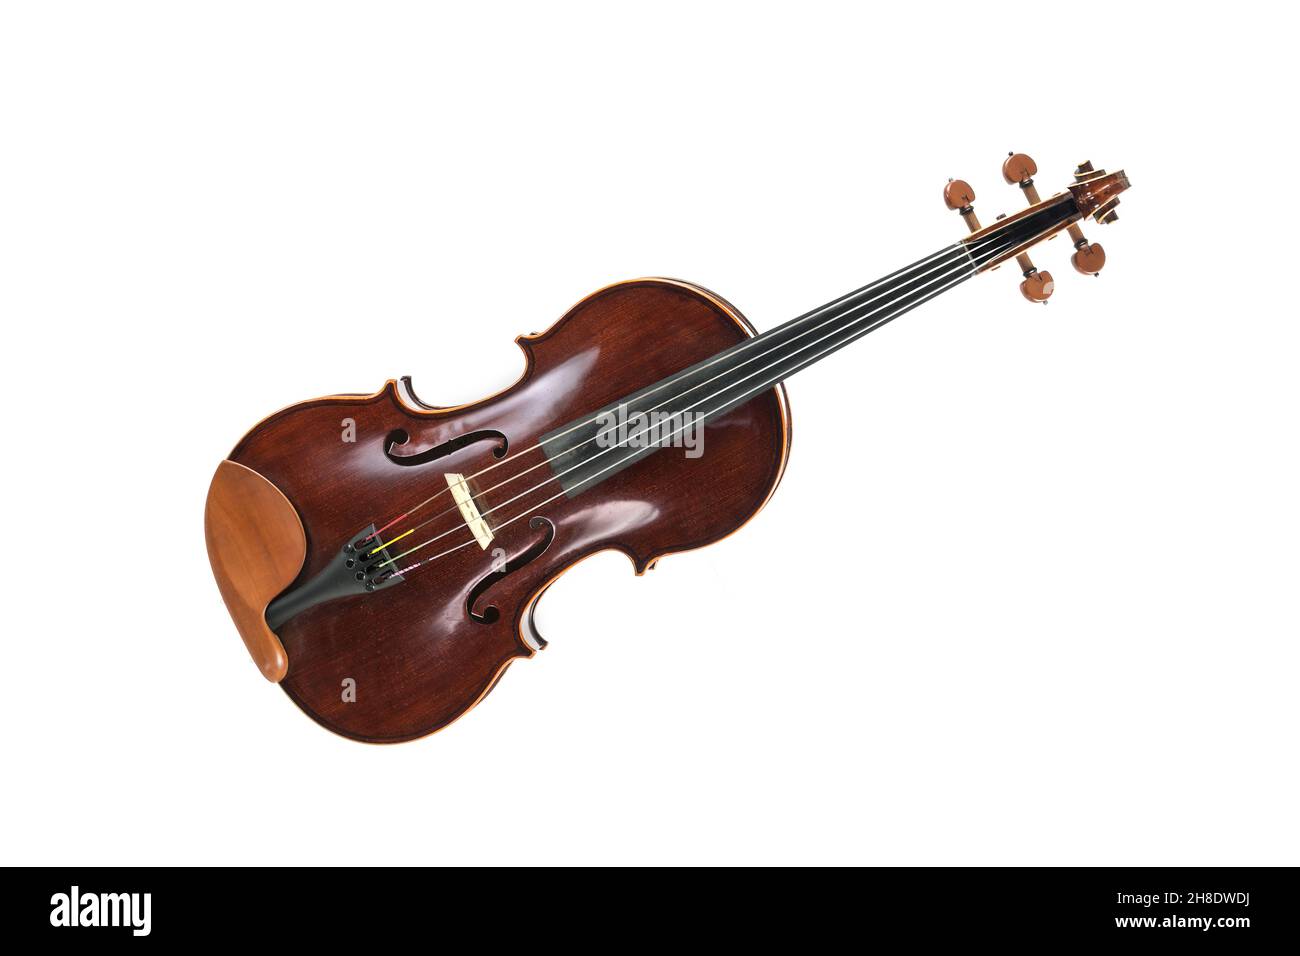 Viola, a stringed musical instrument from the viol family, used in string quartet, chamber music and symphony orchestra, isolated on a white backgroun Stock Photo